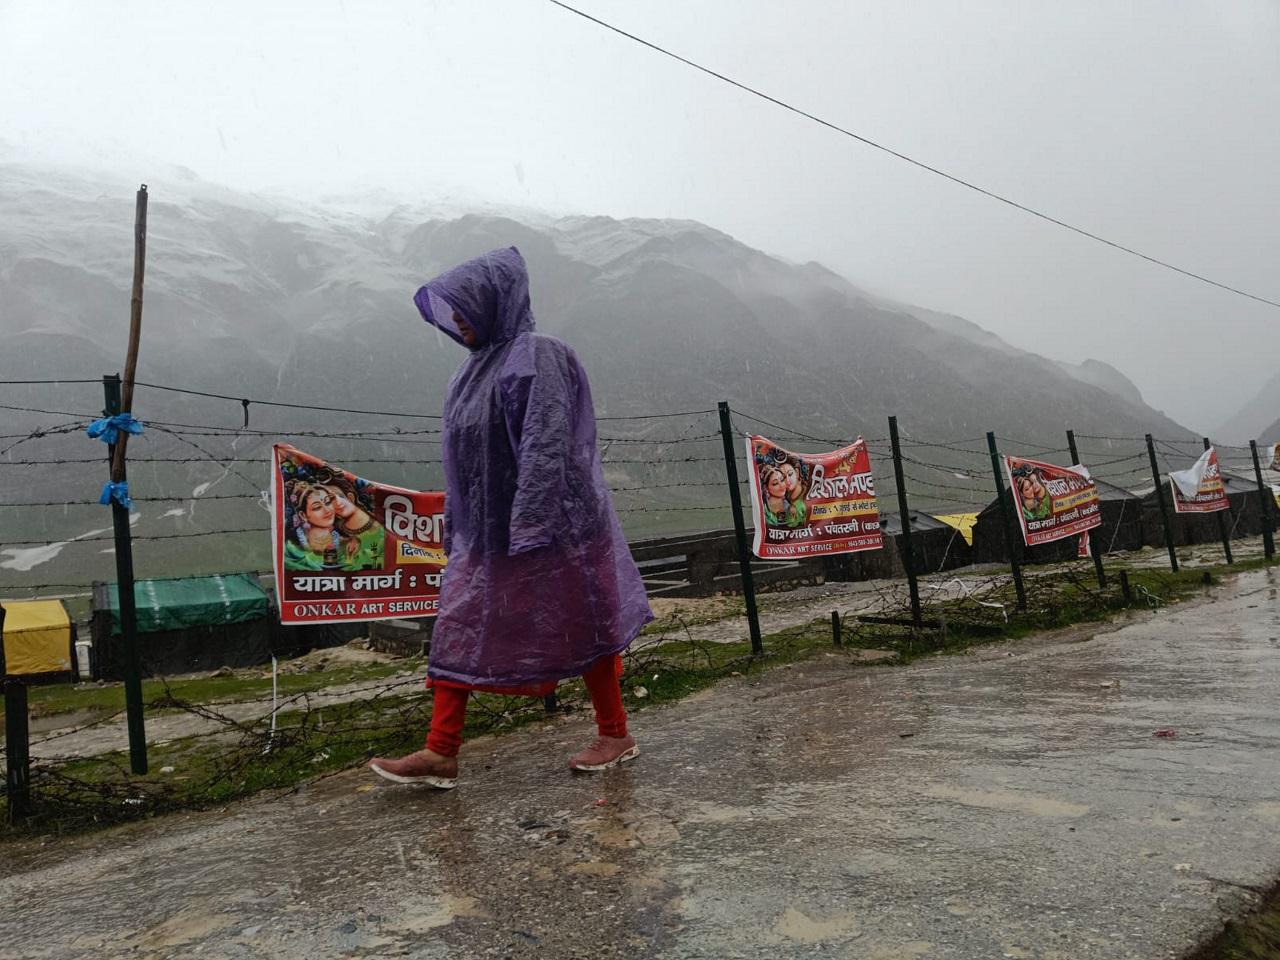 According to the officials, fresh batches of pilgrims were not allowed to leave Jammu to embark on their yatra due to closure of the Srinagar-Jammu National Highway 